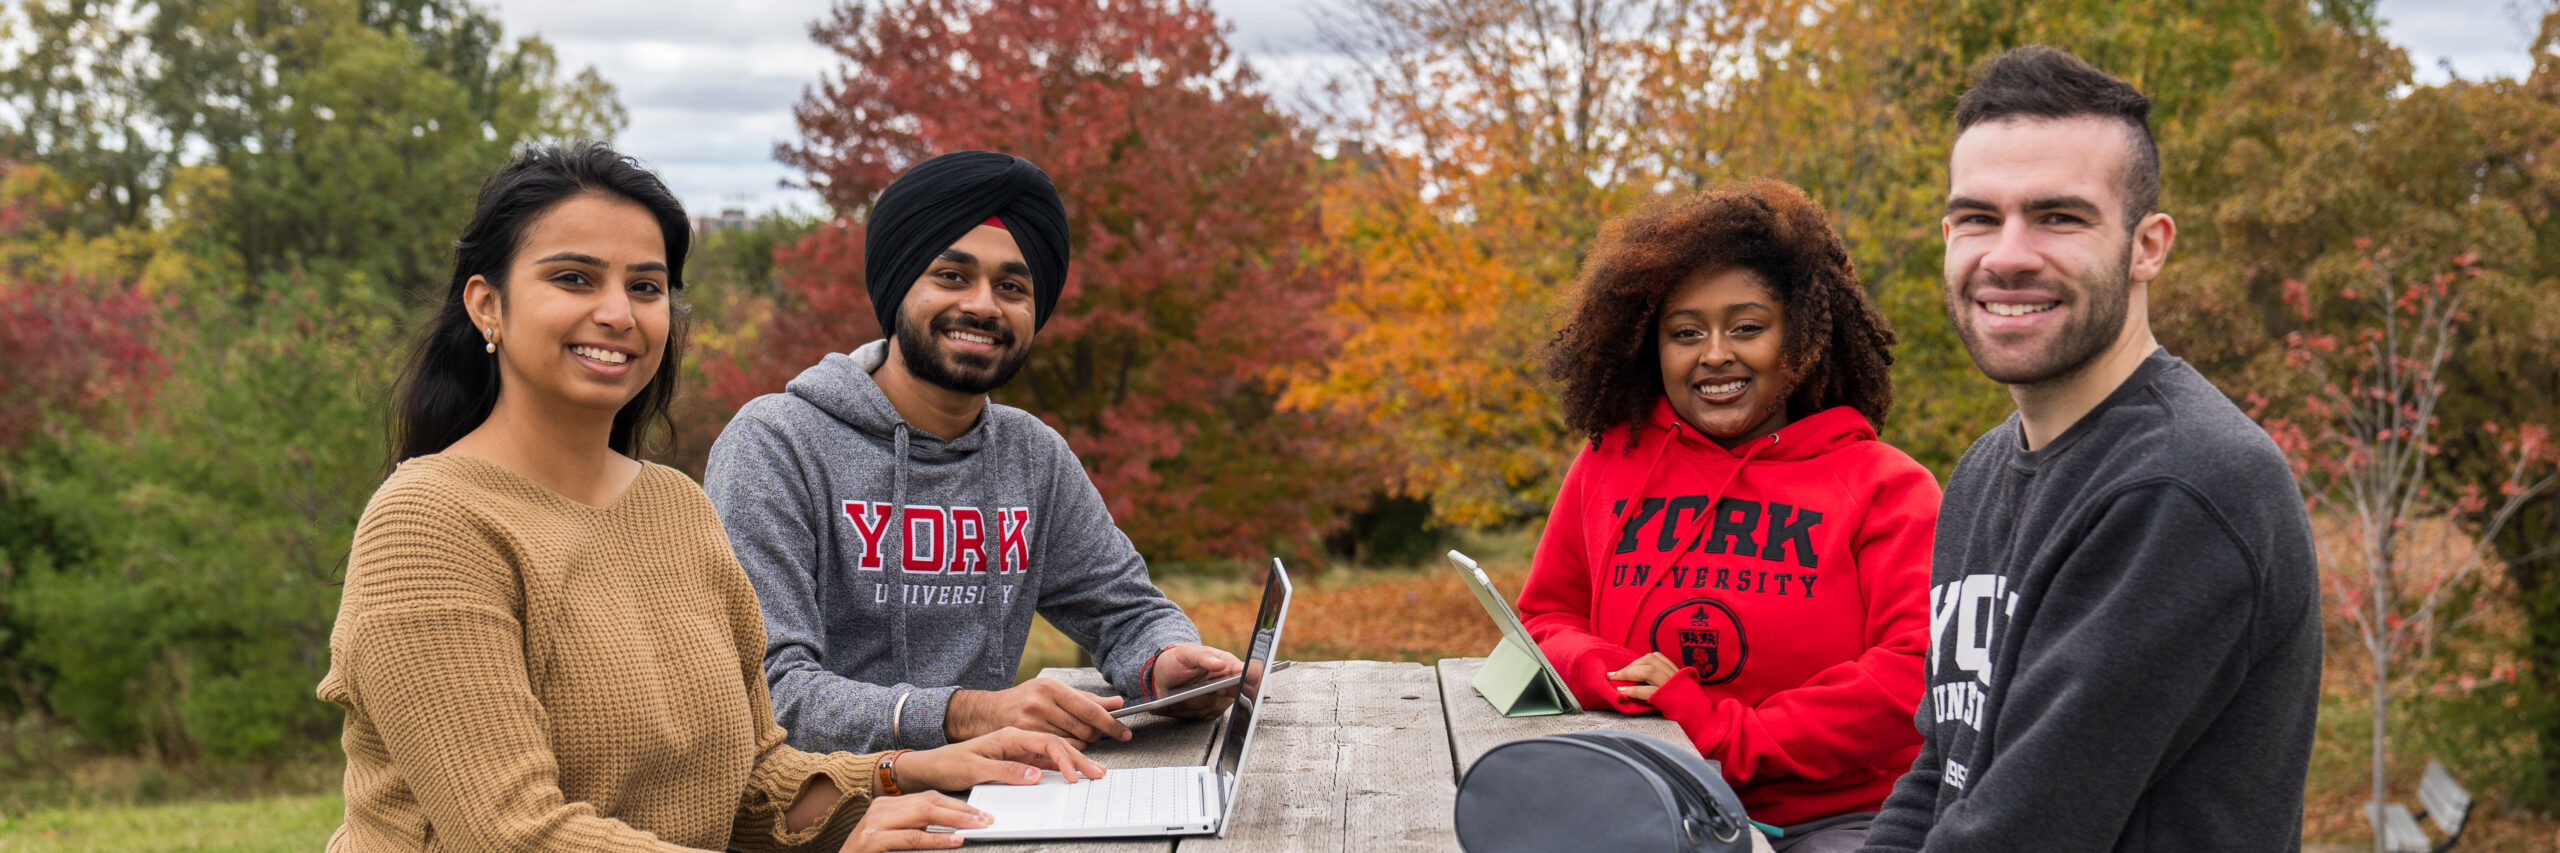 best of yu, diverse group of students at bench